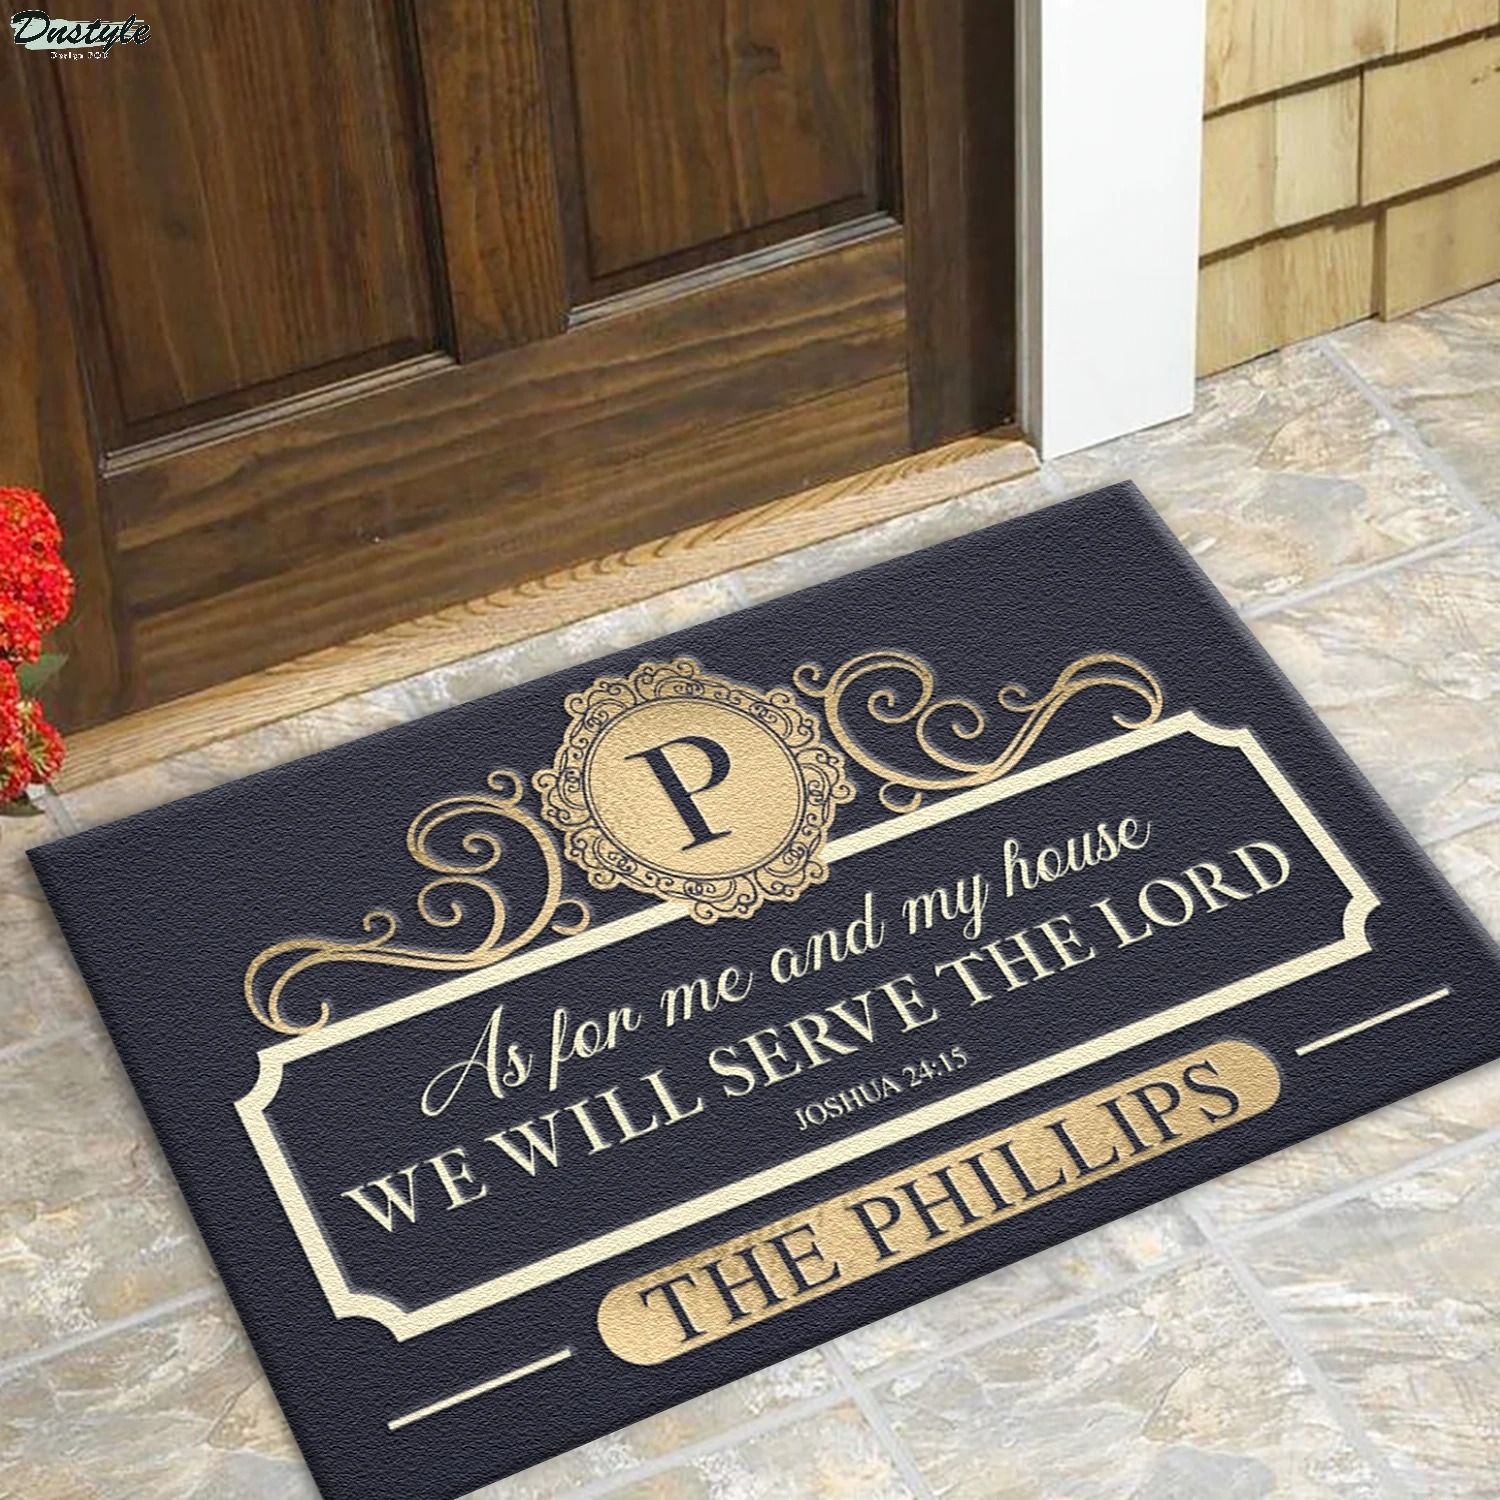 Personalized Home Serve The Lord As for me and my house joshua 24 15 doormat